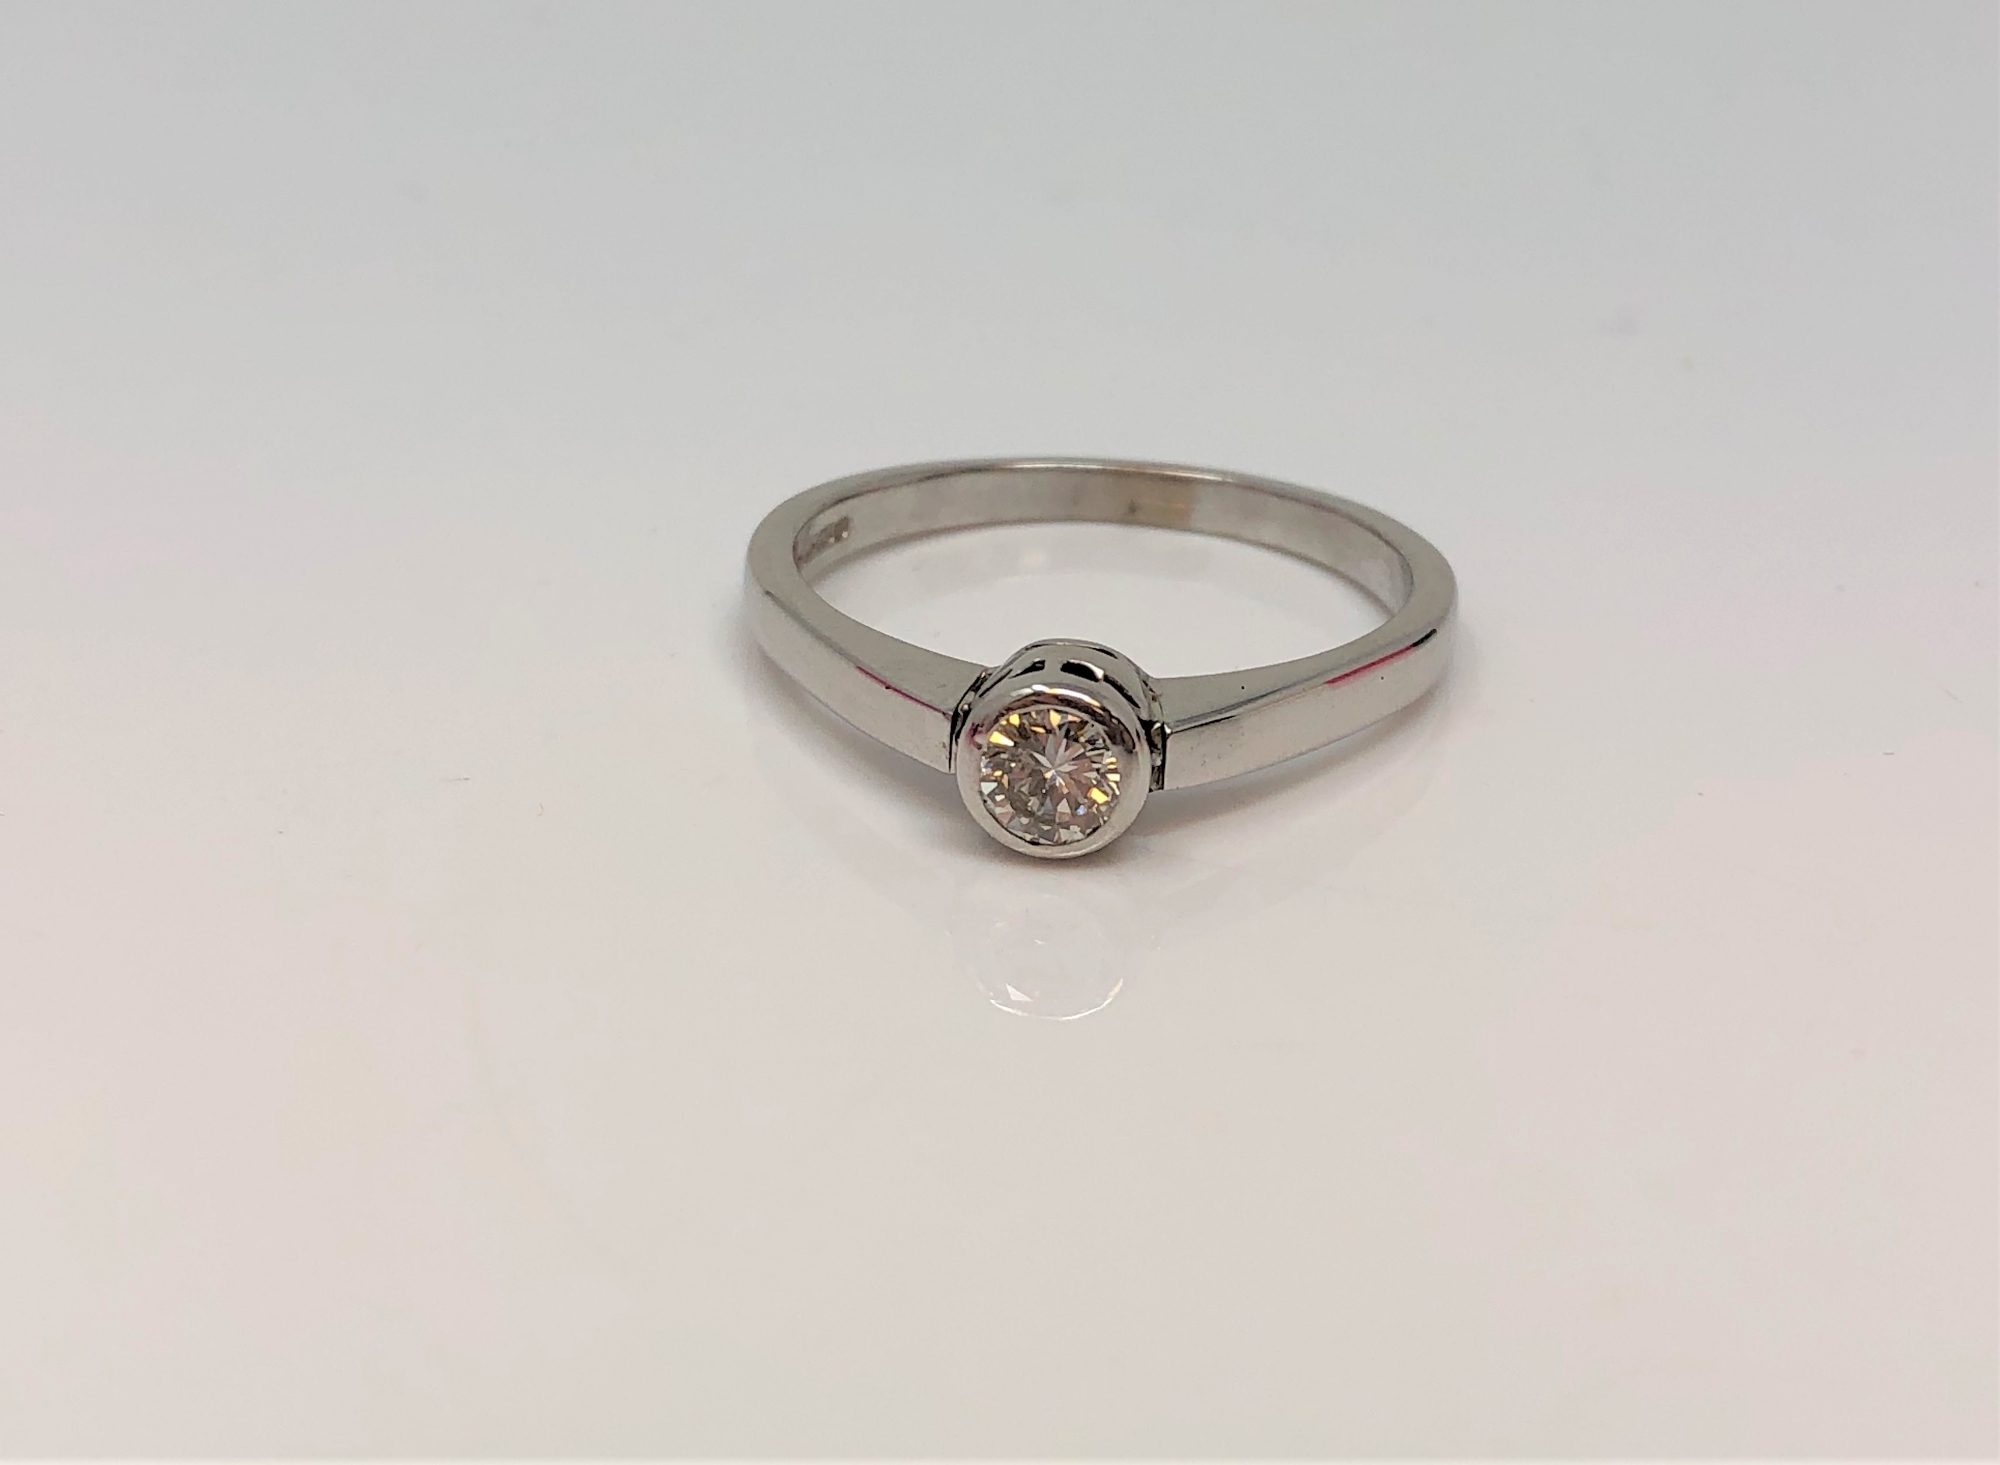 An 18ct white gold diamond solitaire ring, approximately 0.